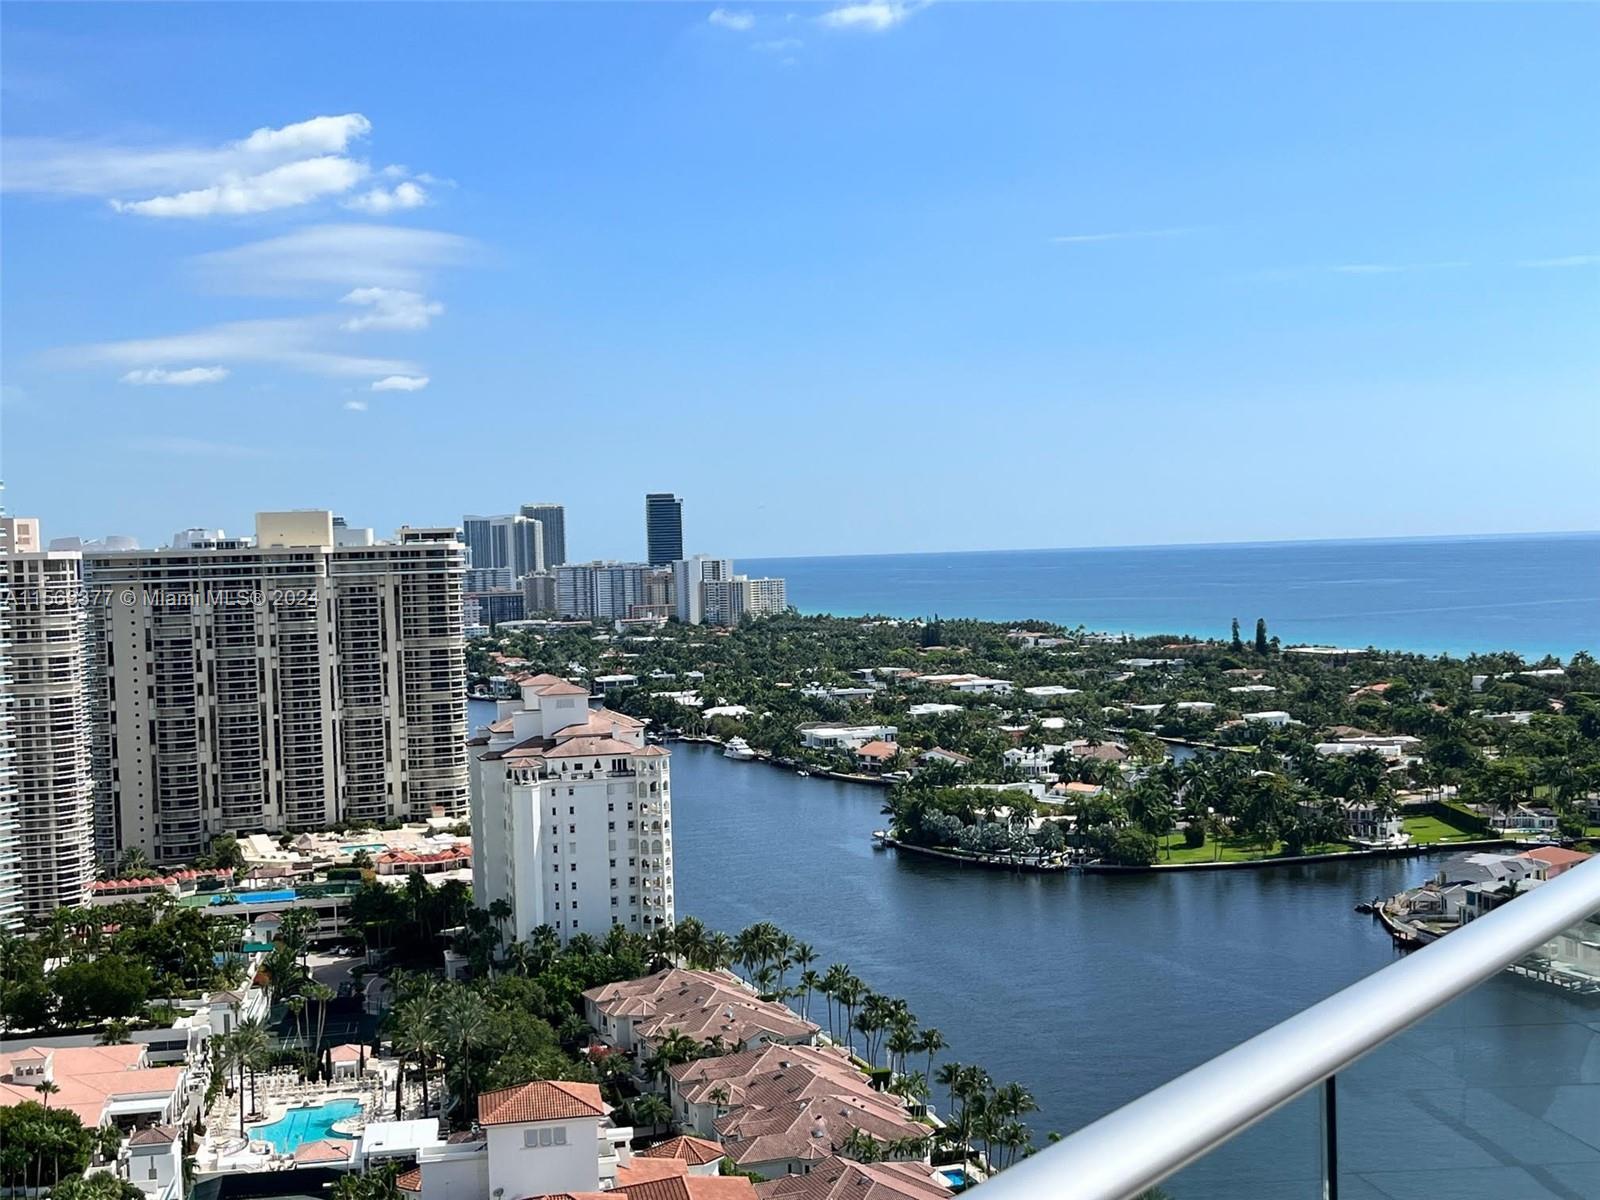 Back on the Market! An opportunity to own a Home in the Sky. Residence TS-02 at Turnberry Isle North